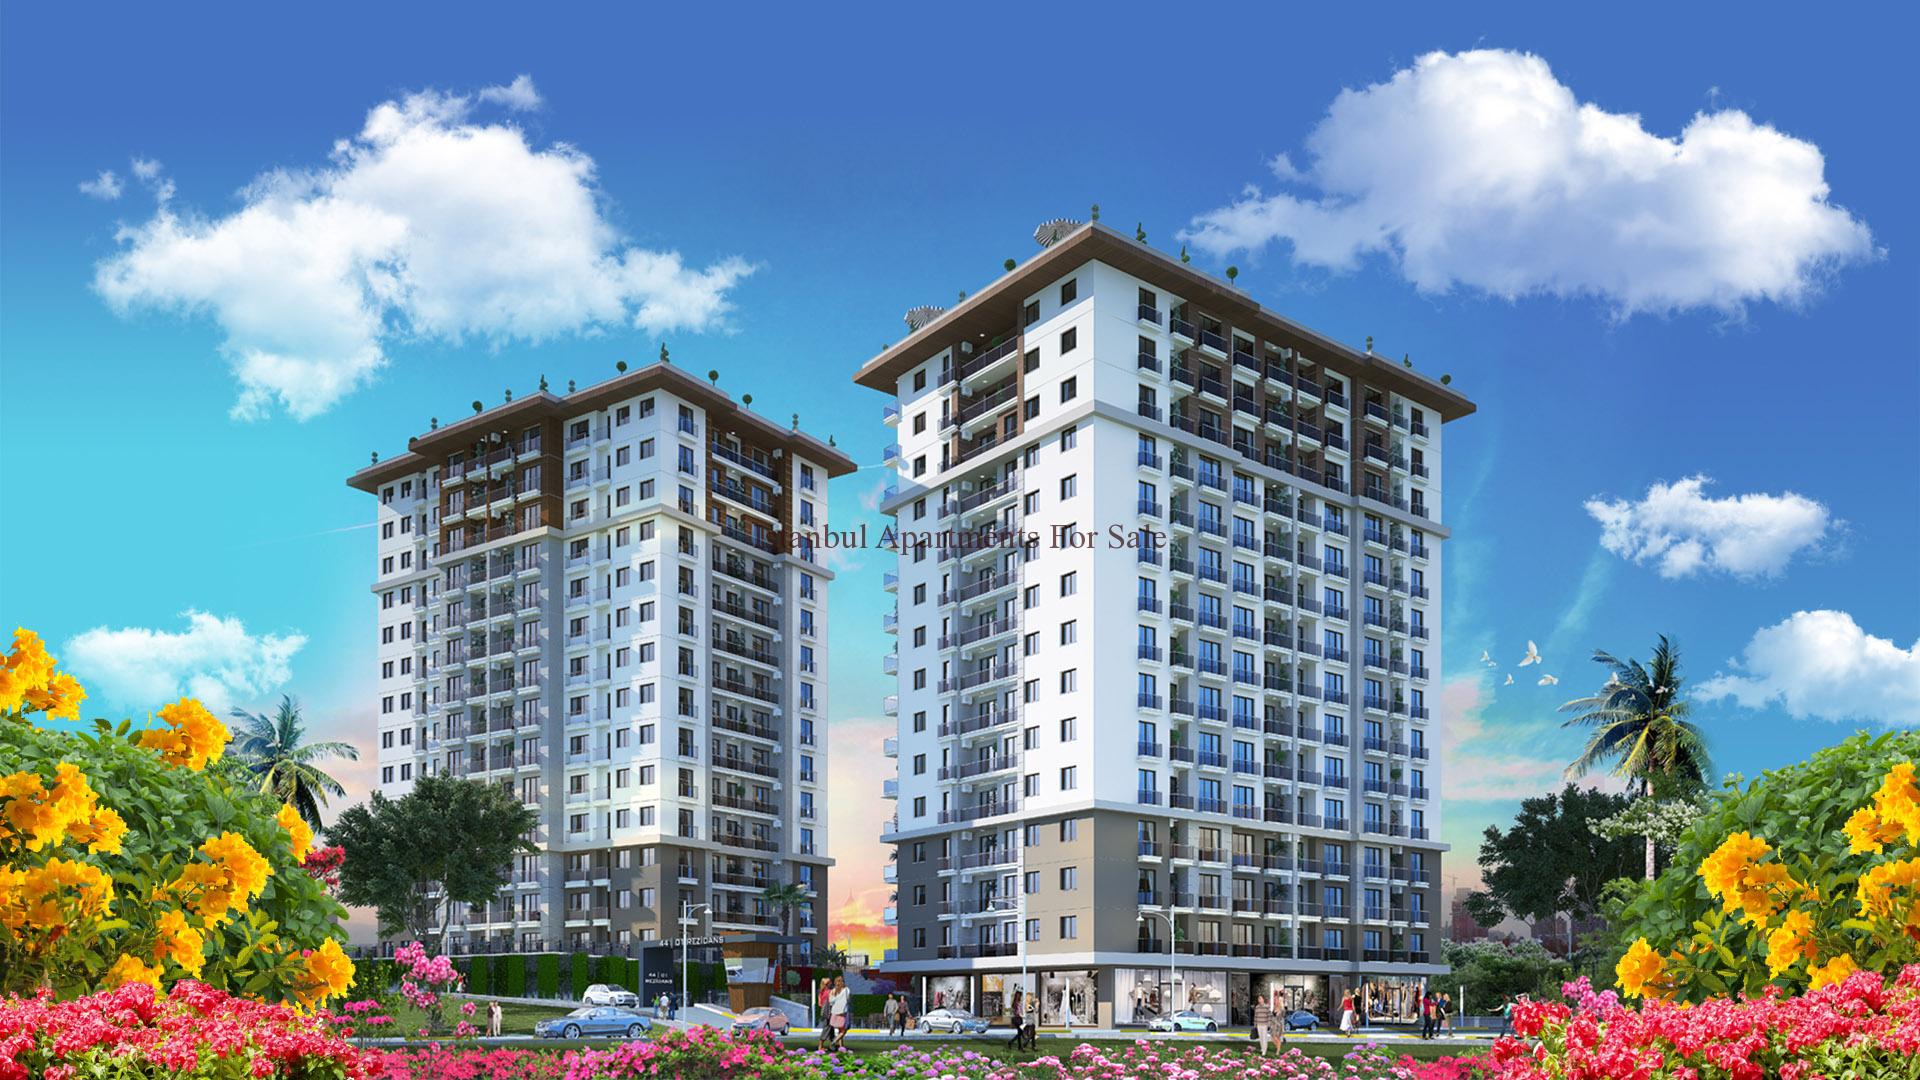 Istanbul Apartments For Sale in Turkey Istanbul City Centre Affordable Apartments For Sale Kagithane  